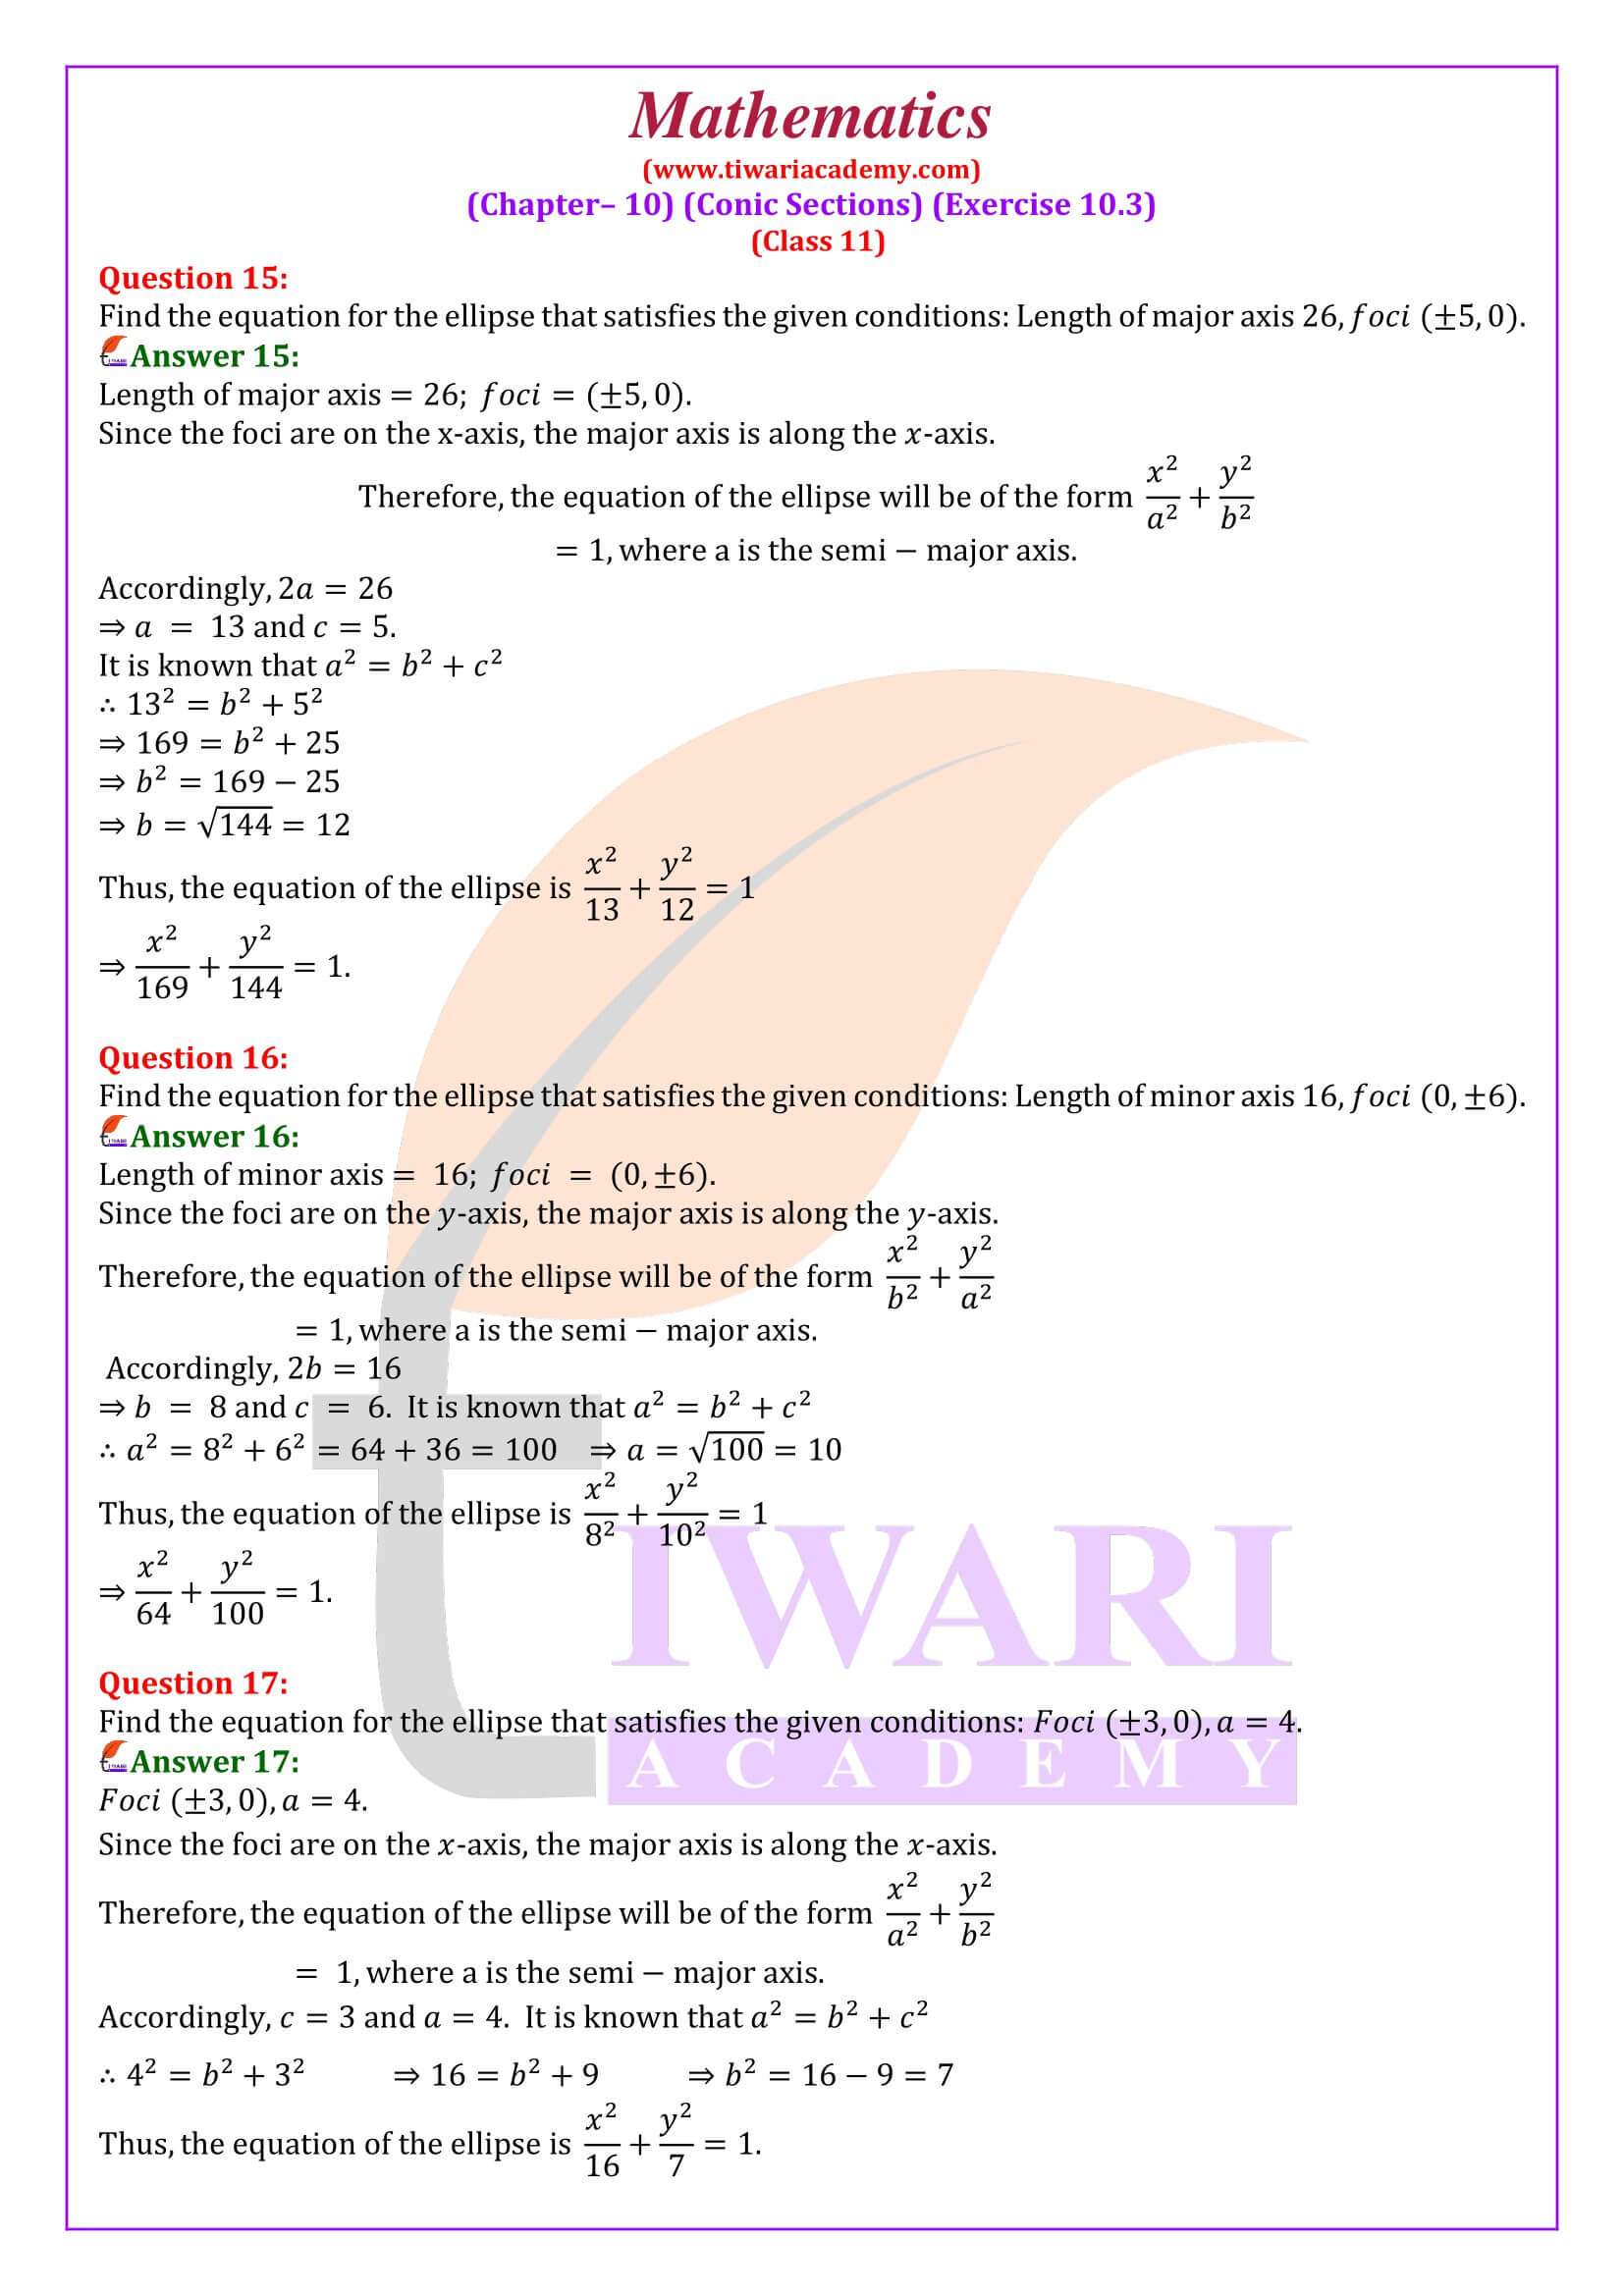 Class 11 Maths Exercise 10.3 solutions answers